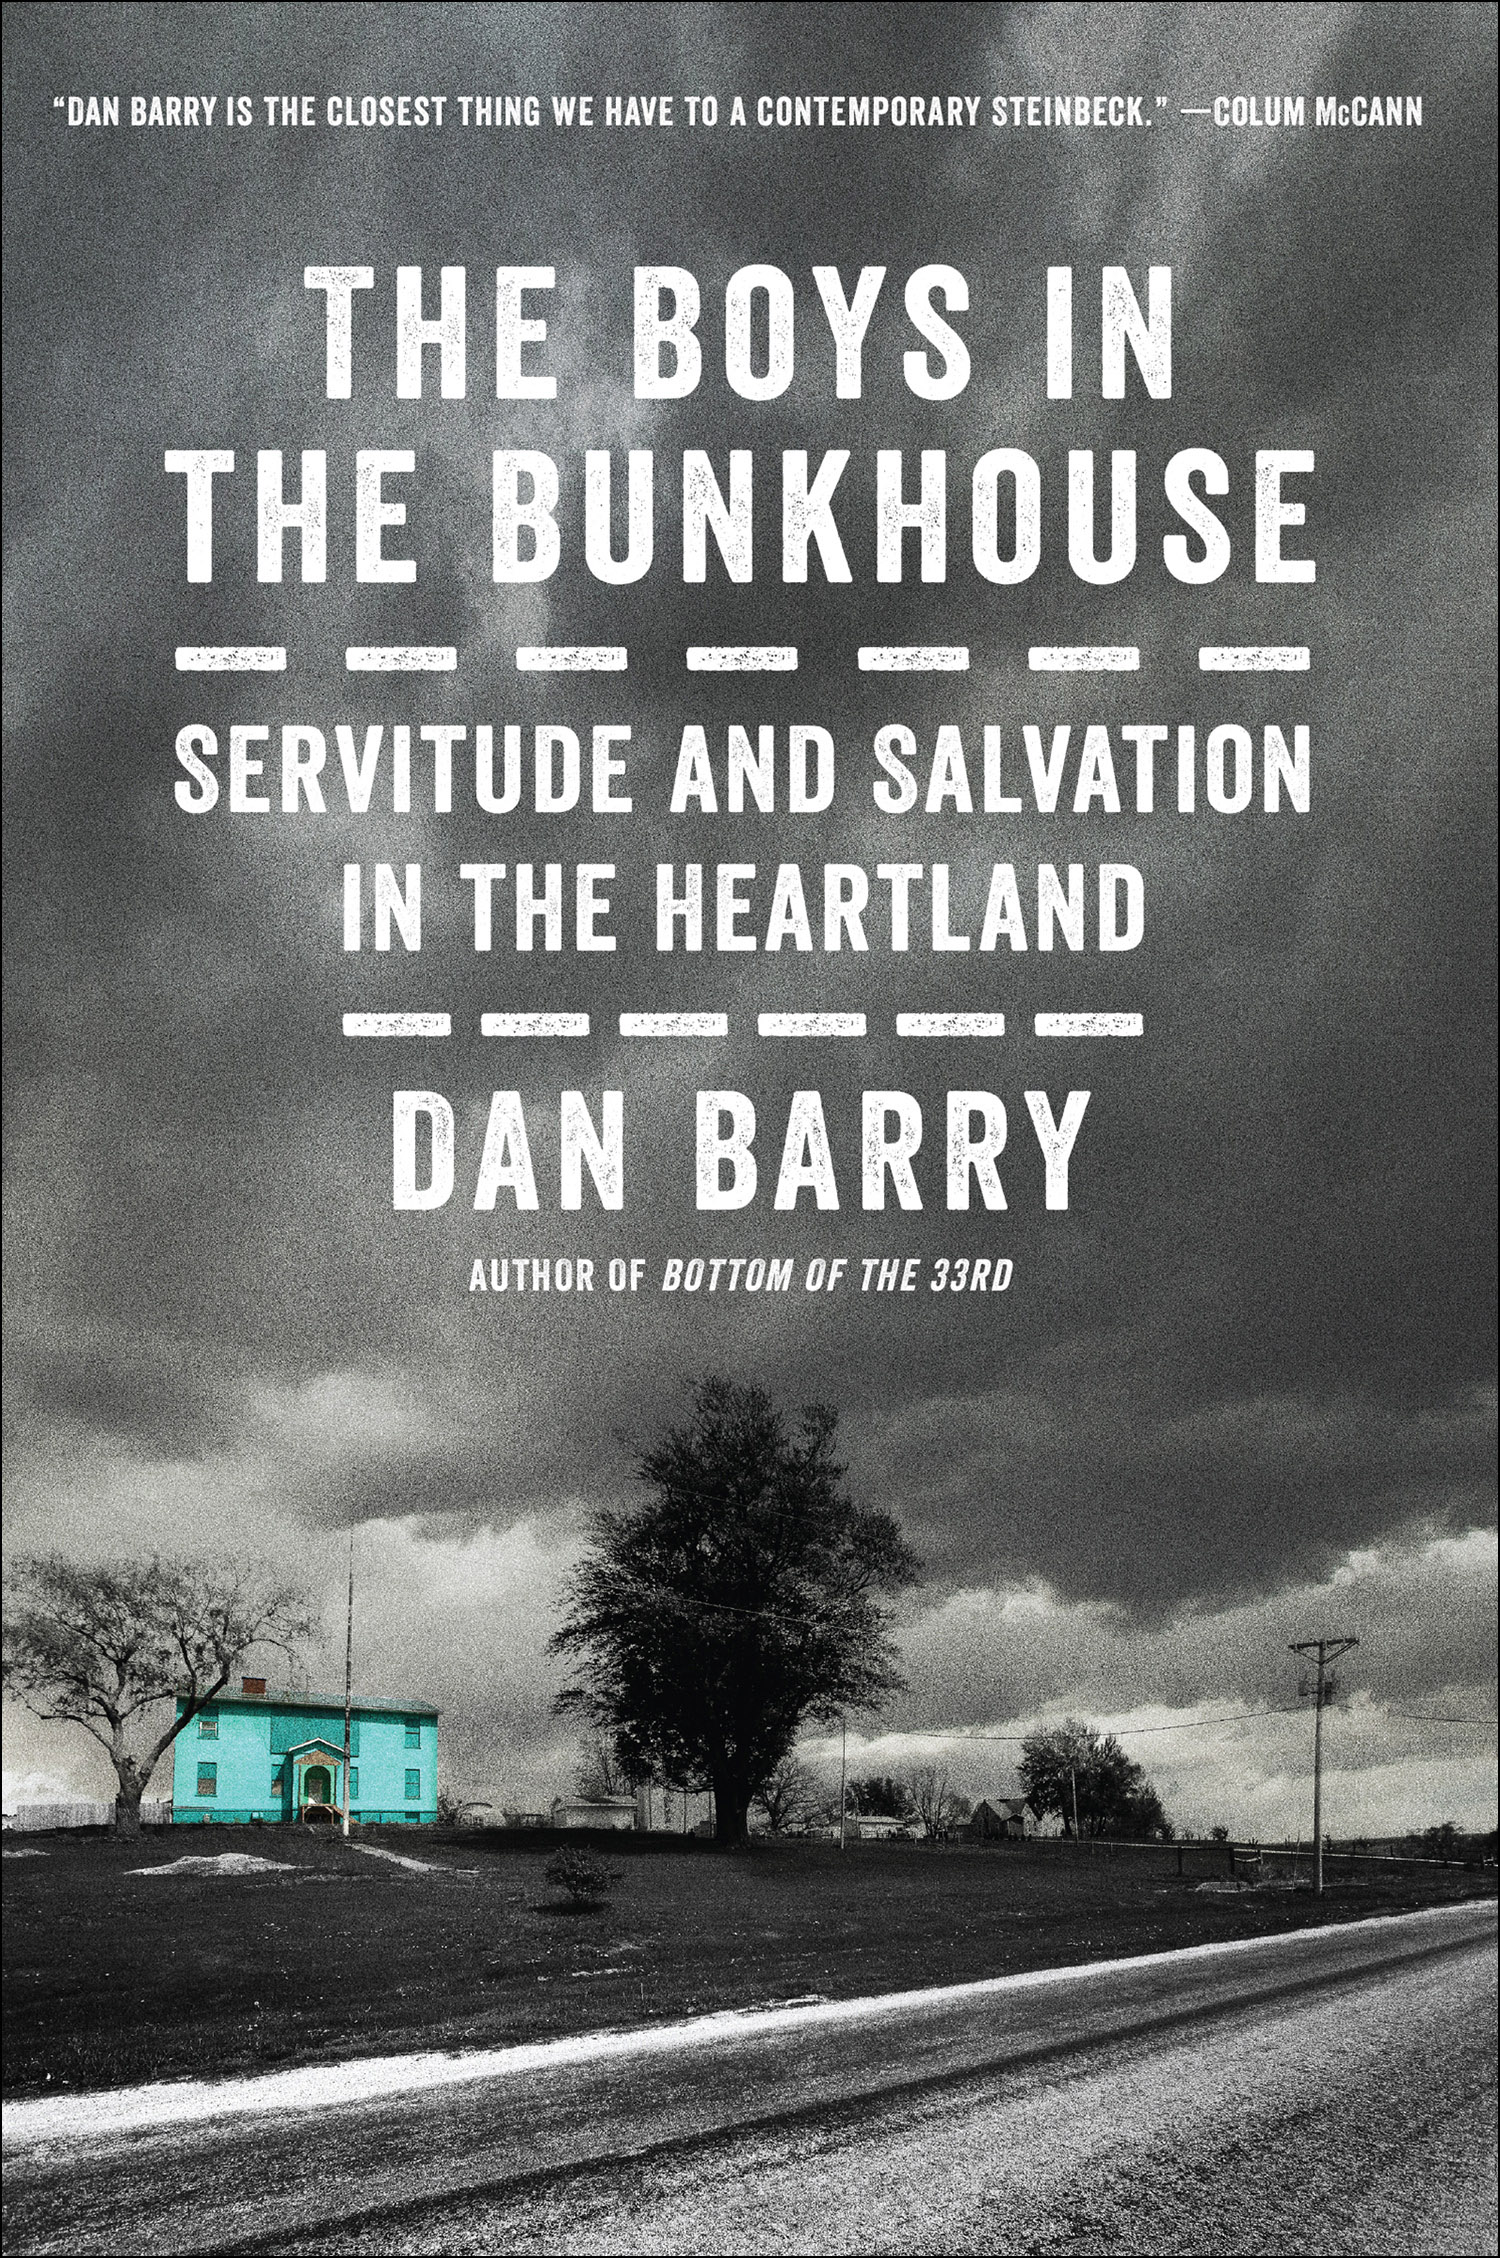 The boys in the bunkhouse servitude and salvation in the heartland cover image